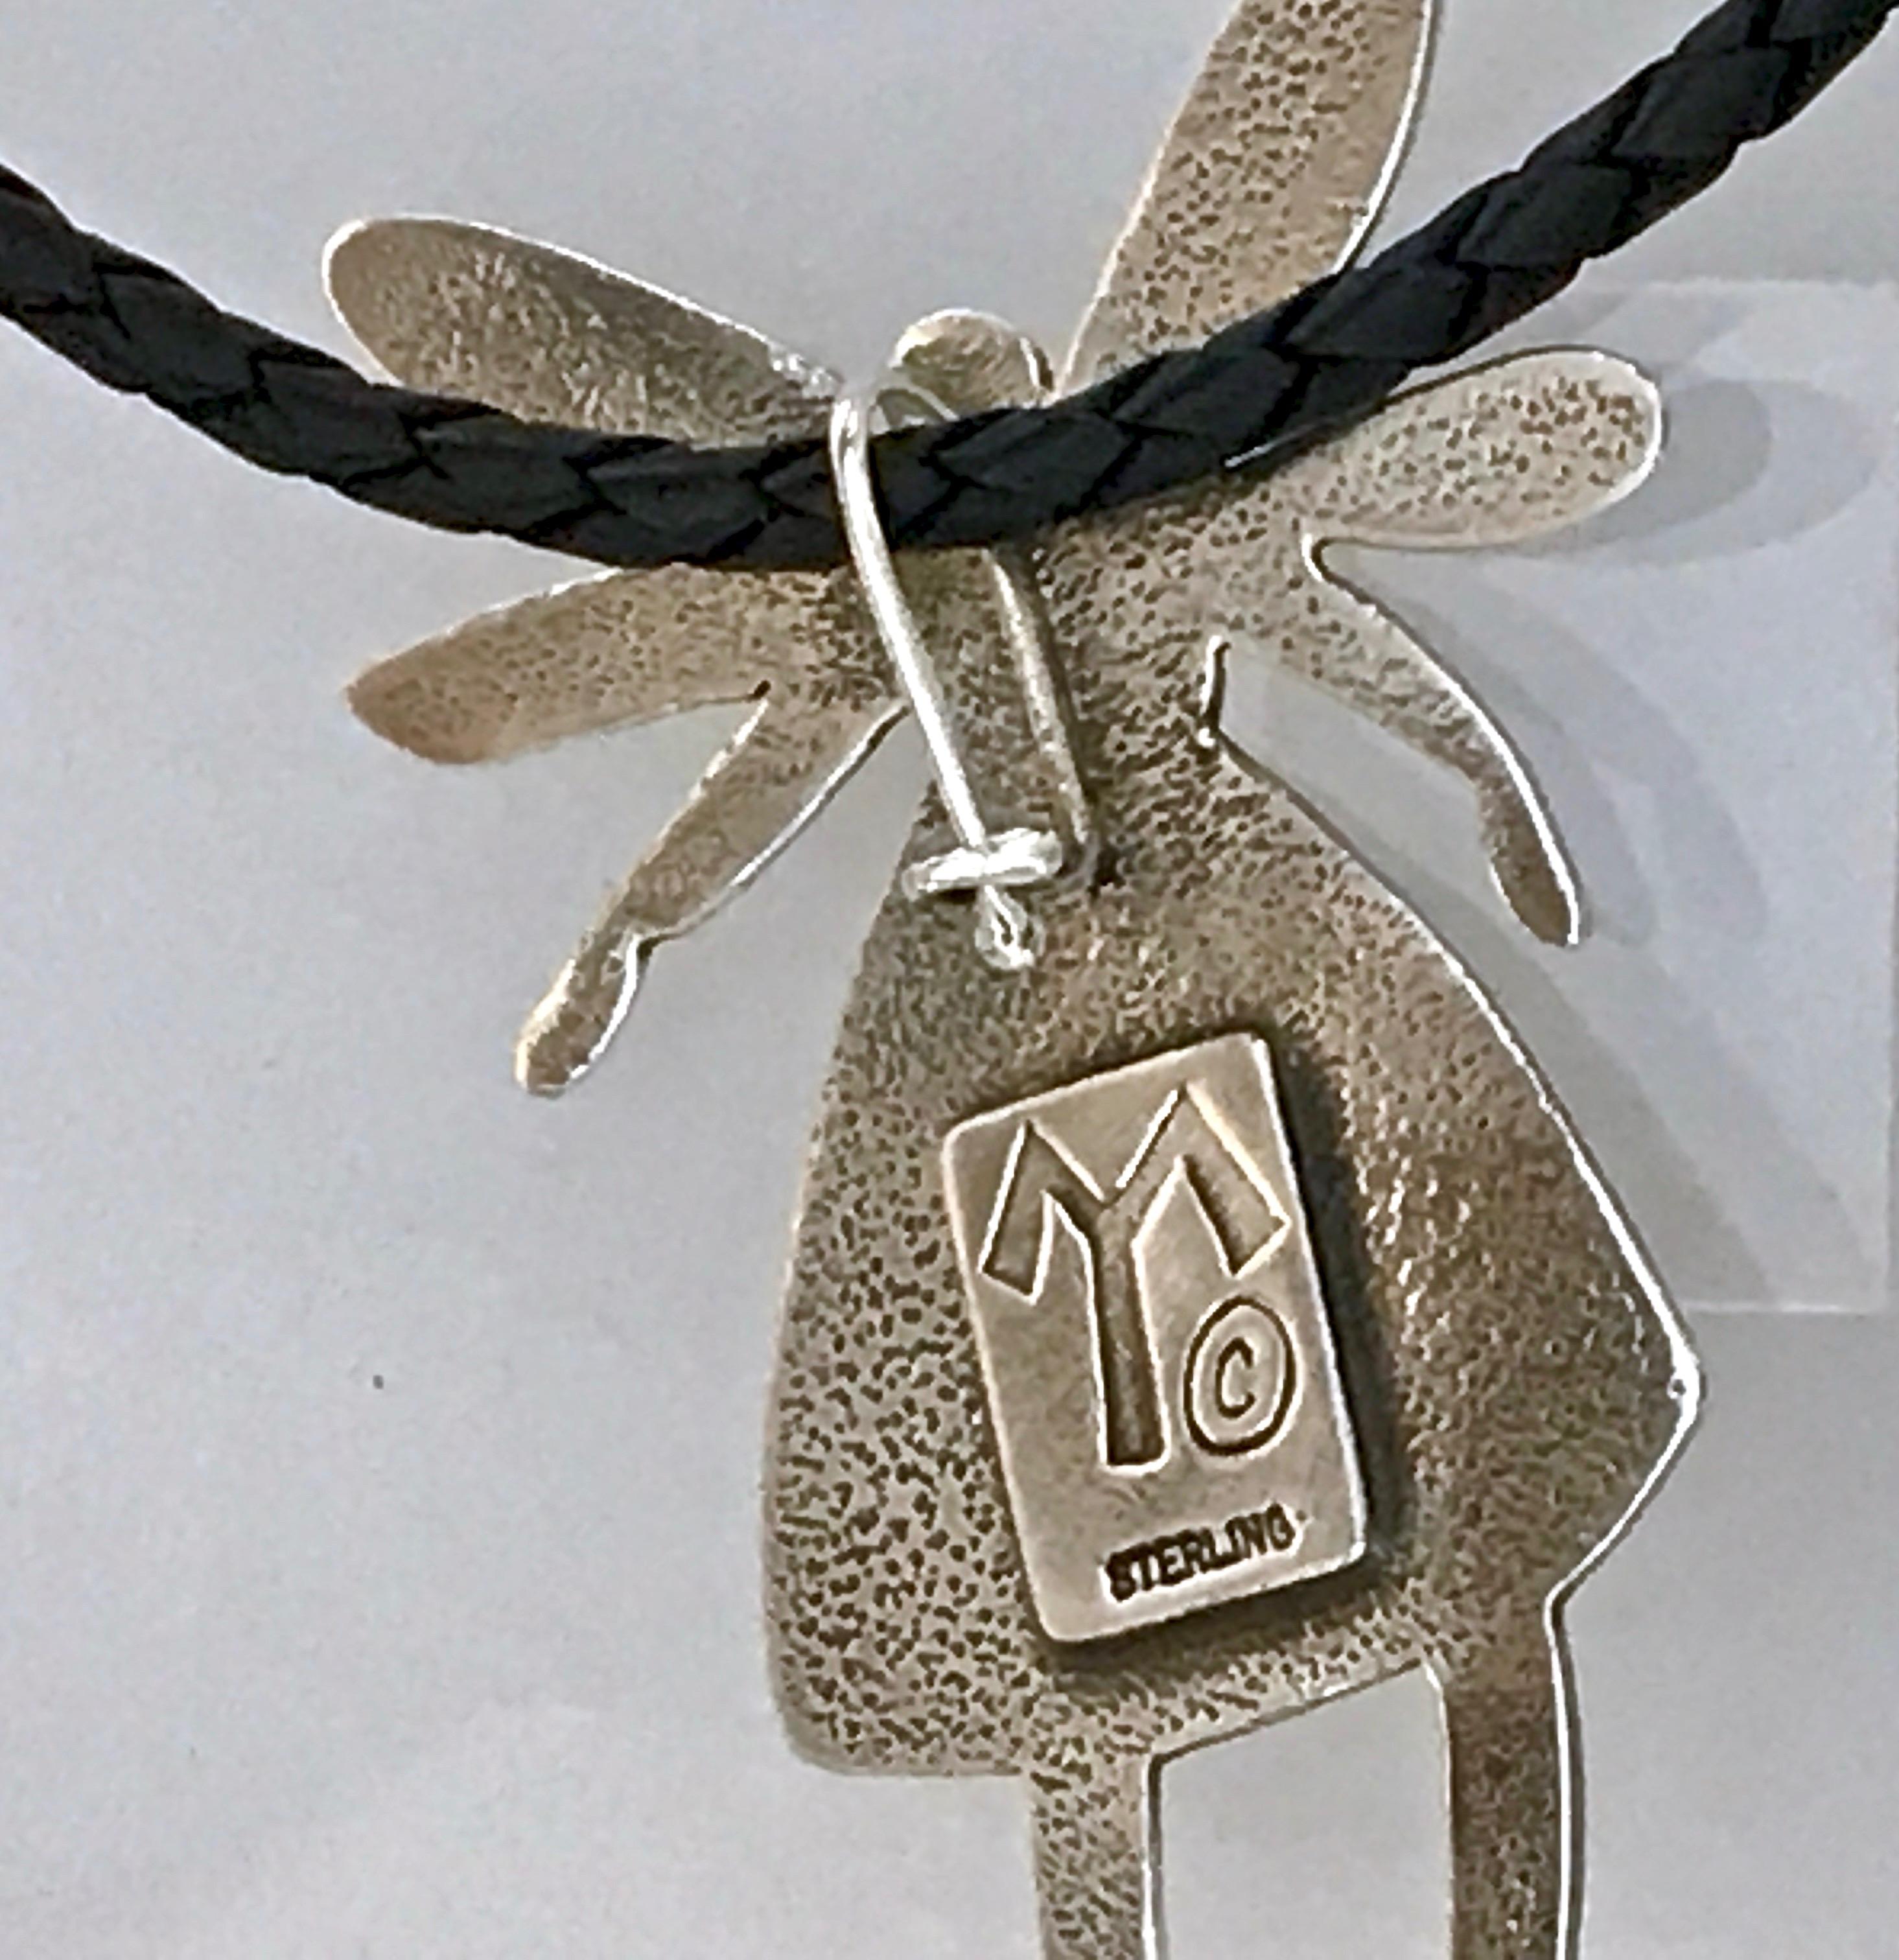 Melanie A. Yazzie ™: jewelry
BITTER WATER GIRL
cast sterling silver enhancer
3” h x 2” w

Pendant/enhancer cast sterling silver. Gently slide the enhancer over beads or a cord of your own. Beads and cords shown in the images are for sale separately.